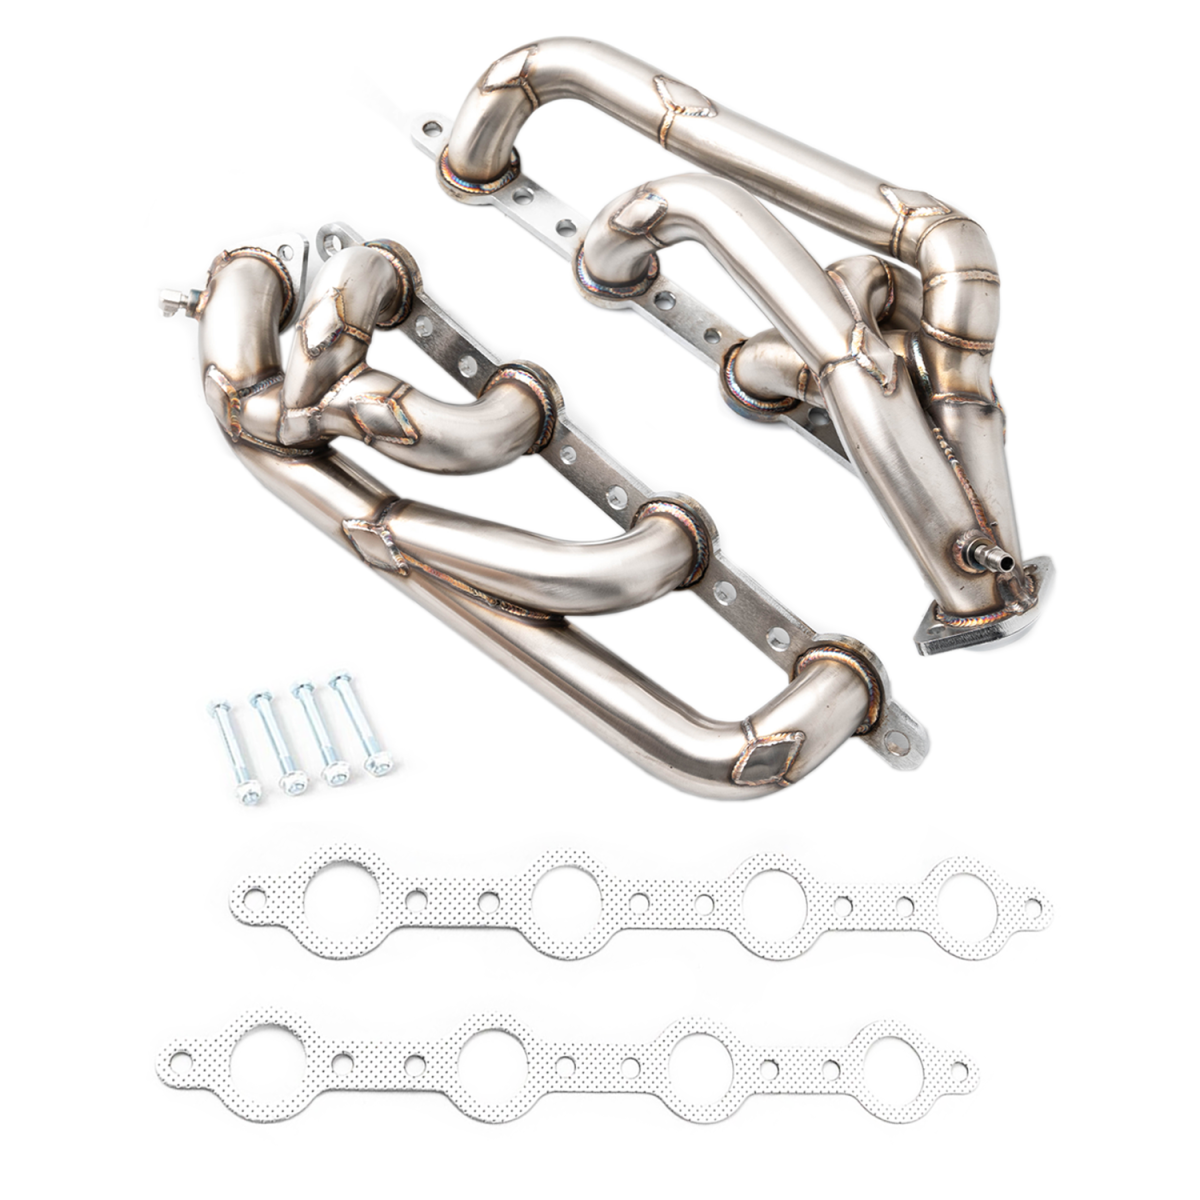 Rudy's Performance Parts - Rudy's Stainless Steel Performance Headers For 1994-1997 OBS Ford 7.3L Powerstroke Diesel